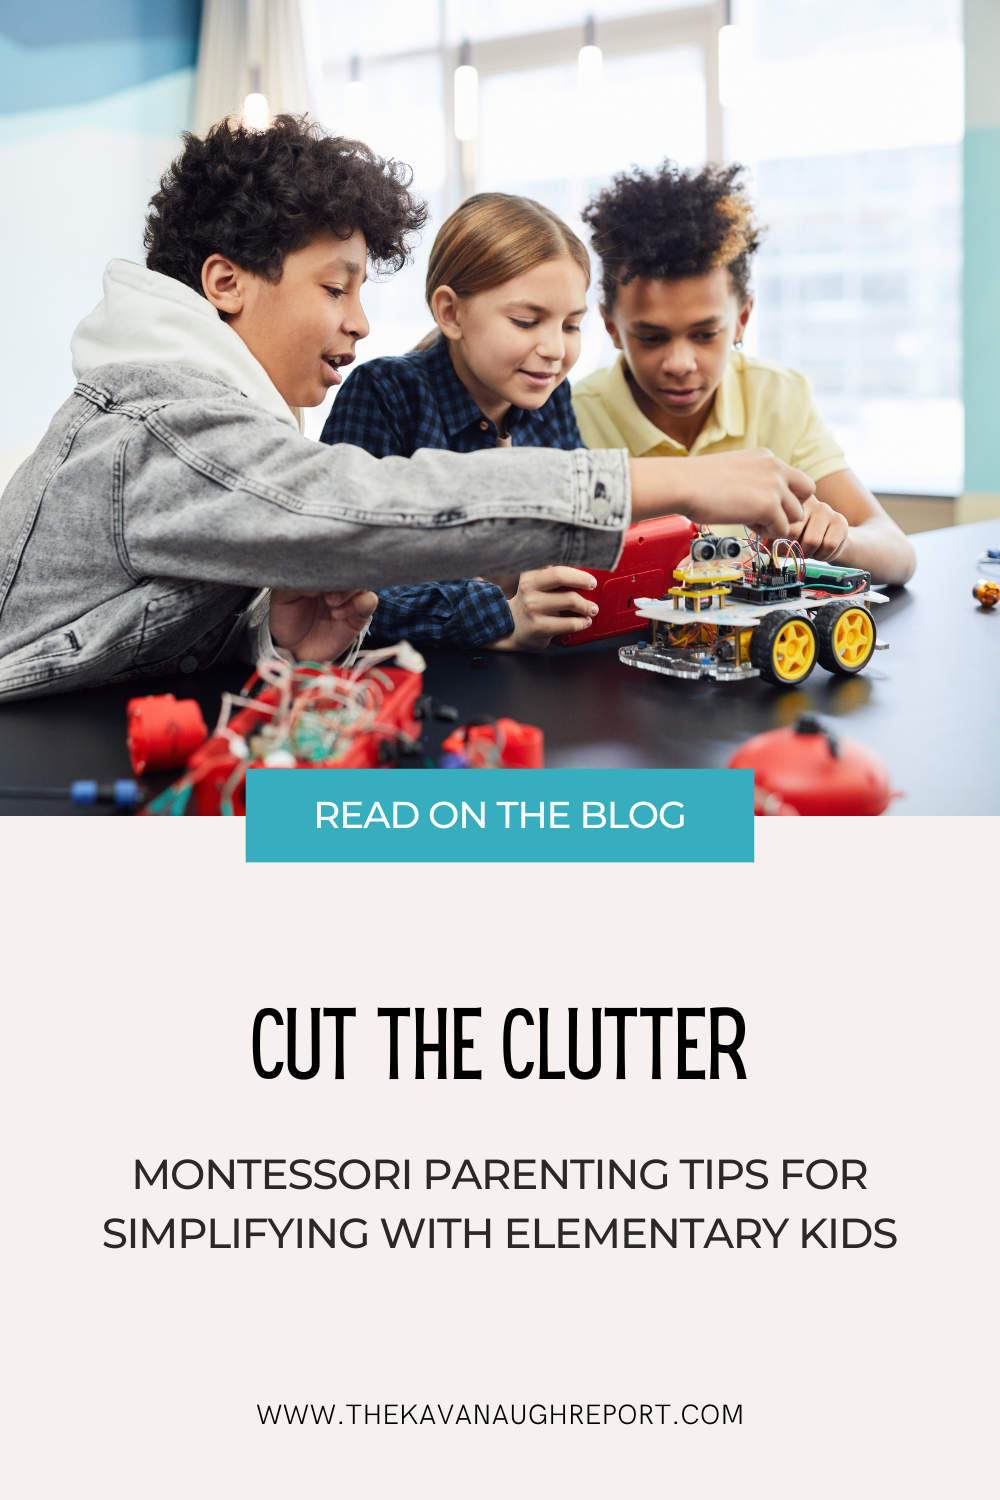 Conquer the clutter in your child's space with practical Montessori-based approaches. Learn how to define the problem, hand over control, make decluttering fun and create a purposeful play environment for your elementary kids. This is your guide to a stress-free, mindful decluttering process.